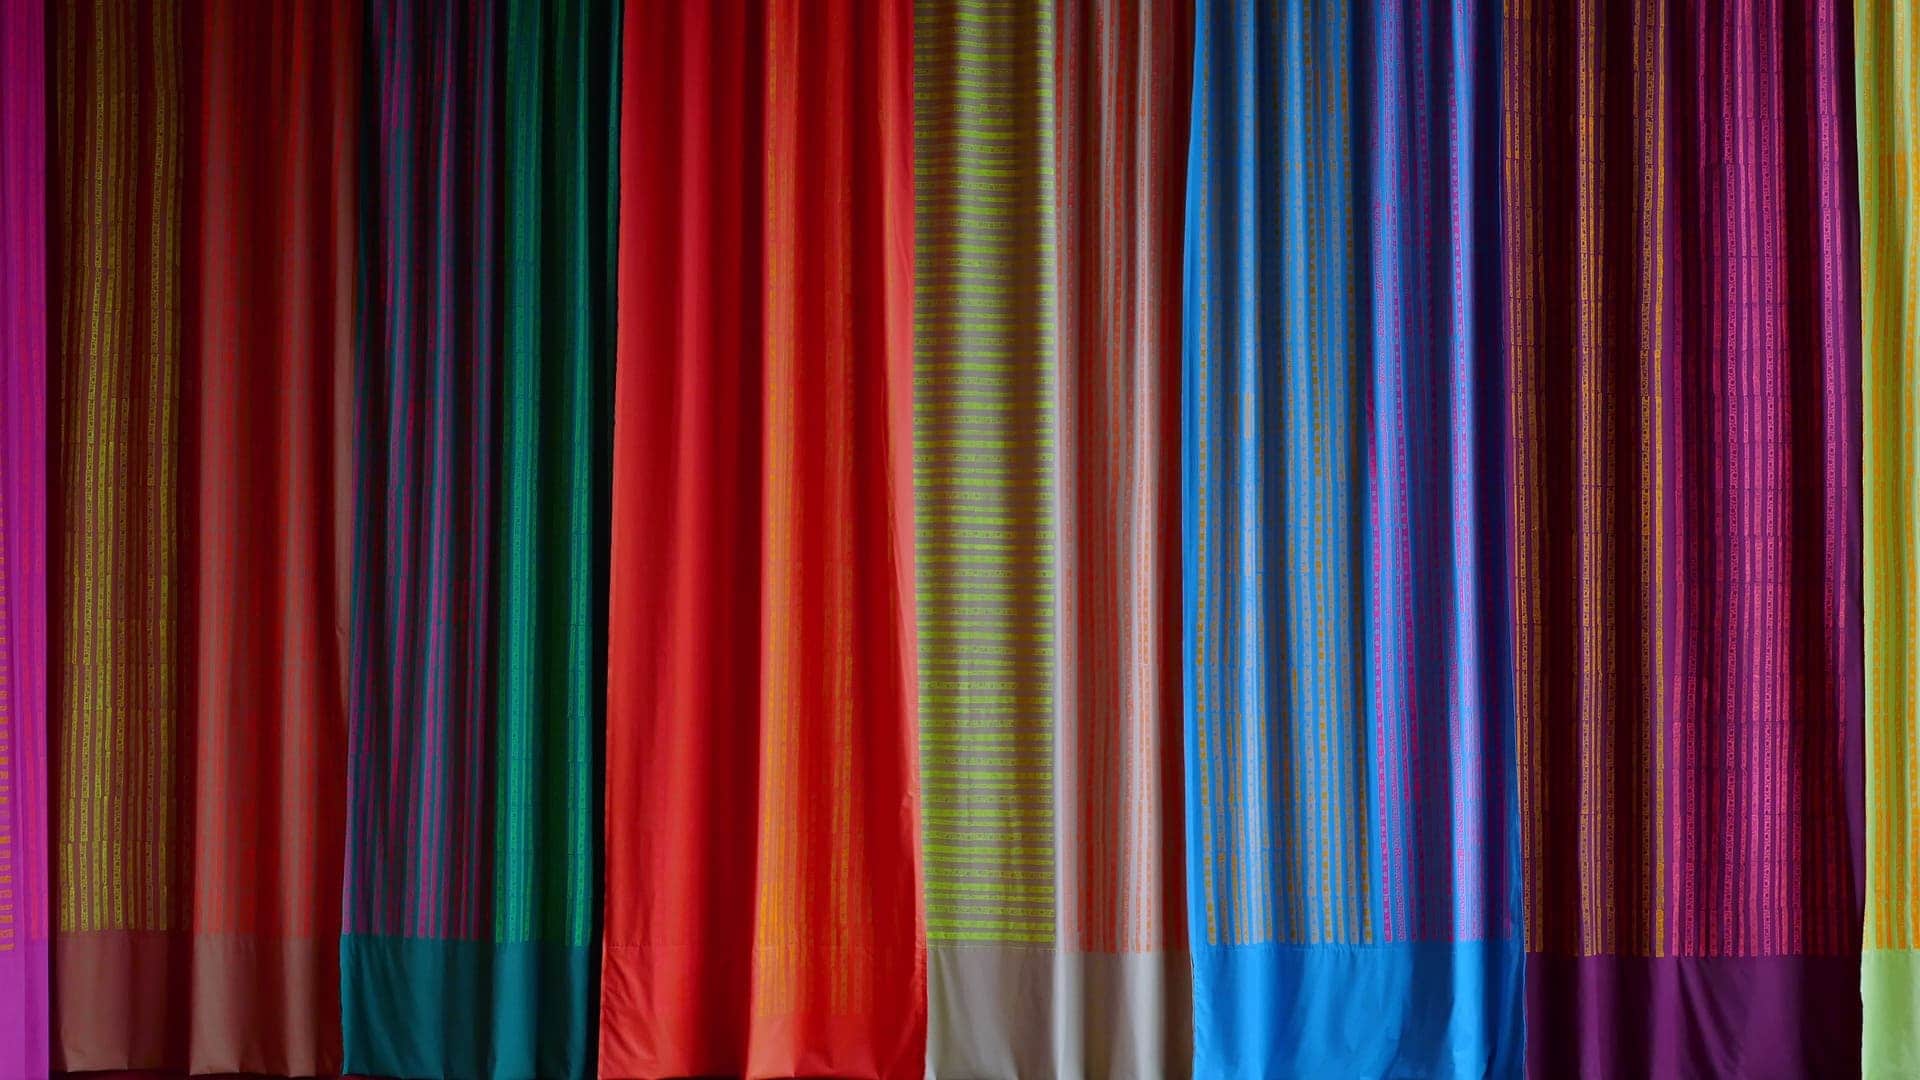 17 All Curtains of Different Colors